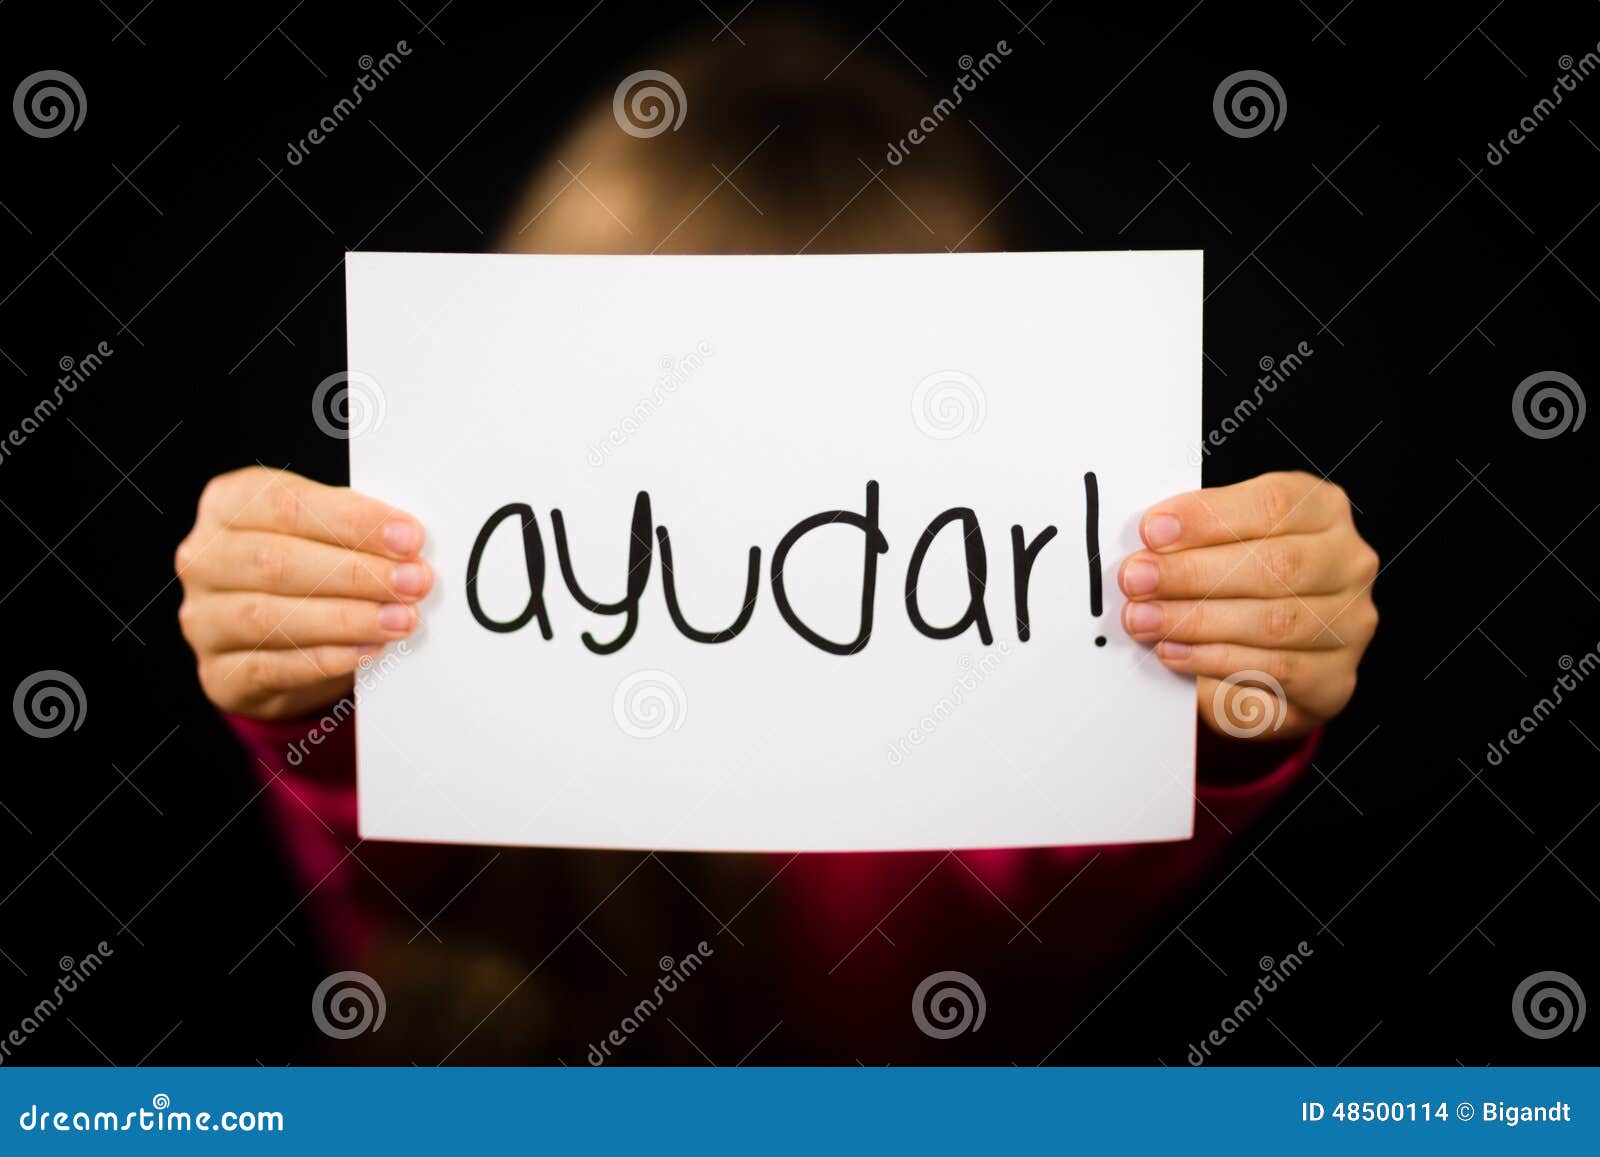 child holding sign with spanish word ayudar - help